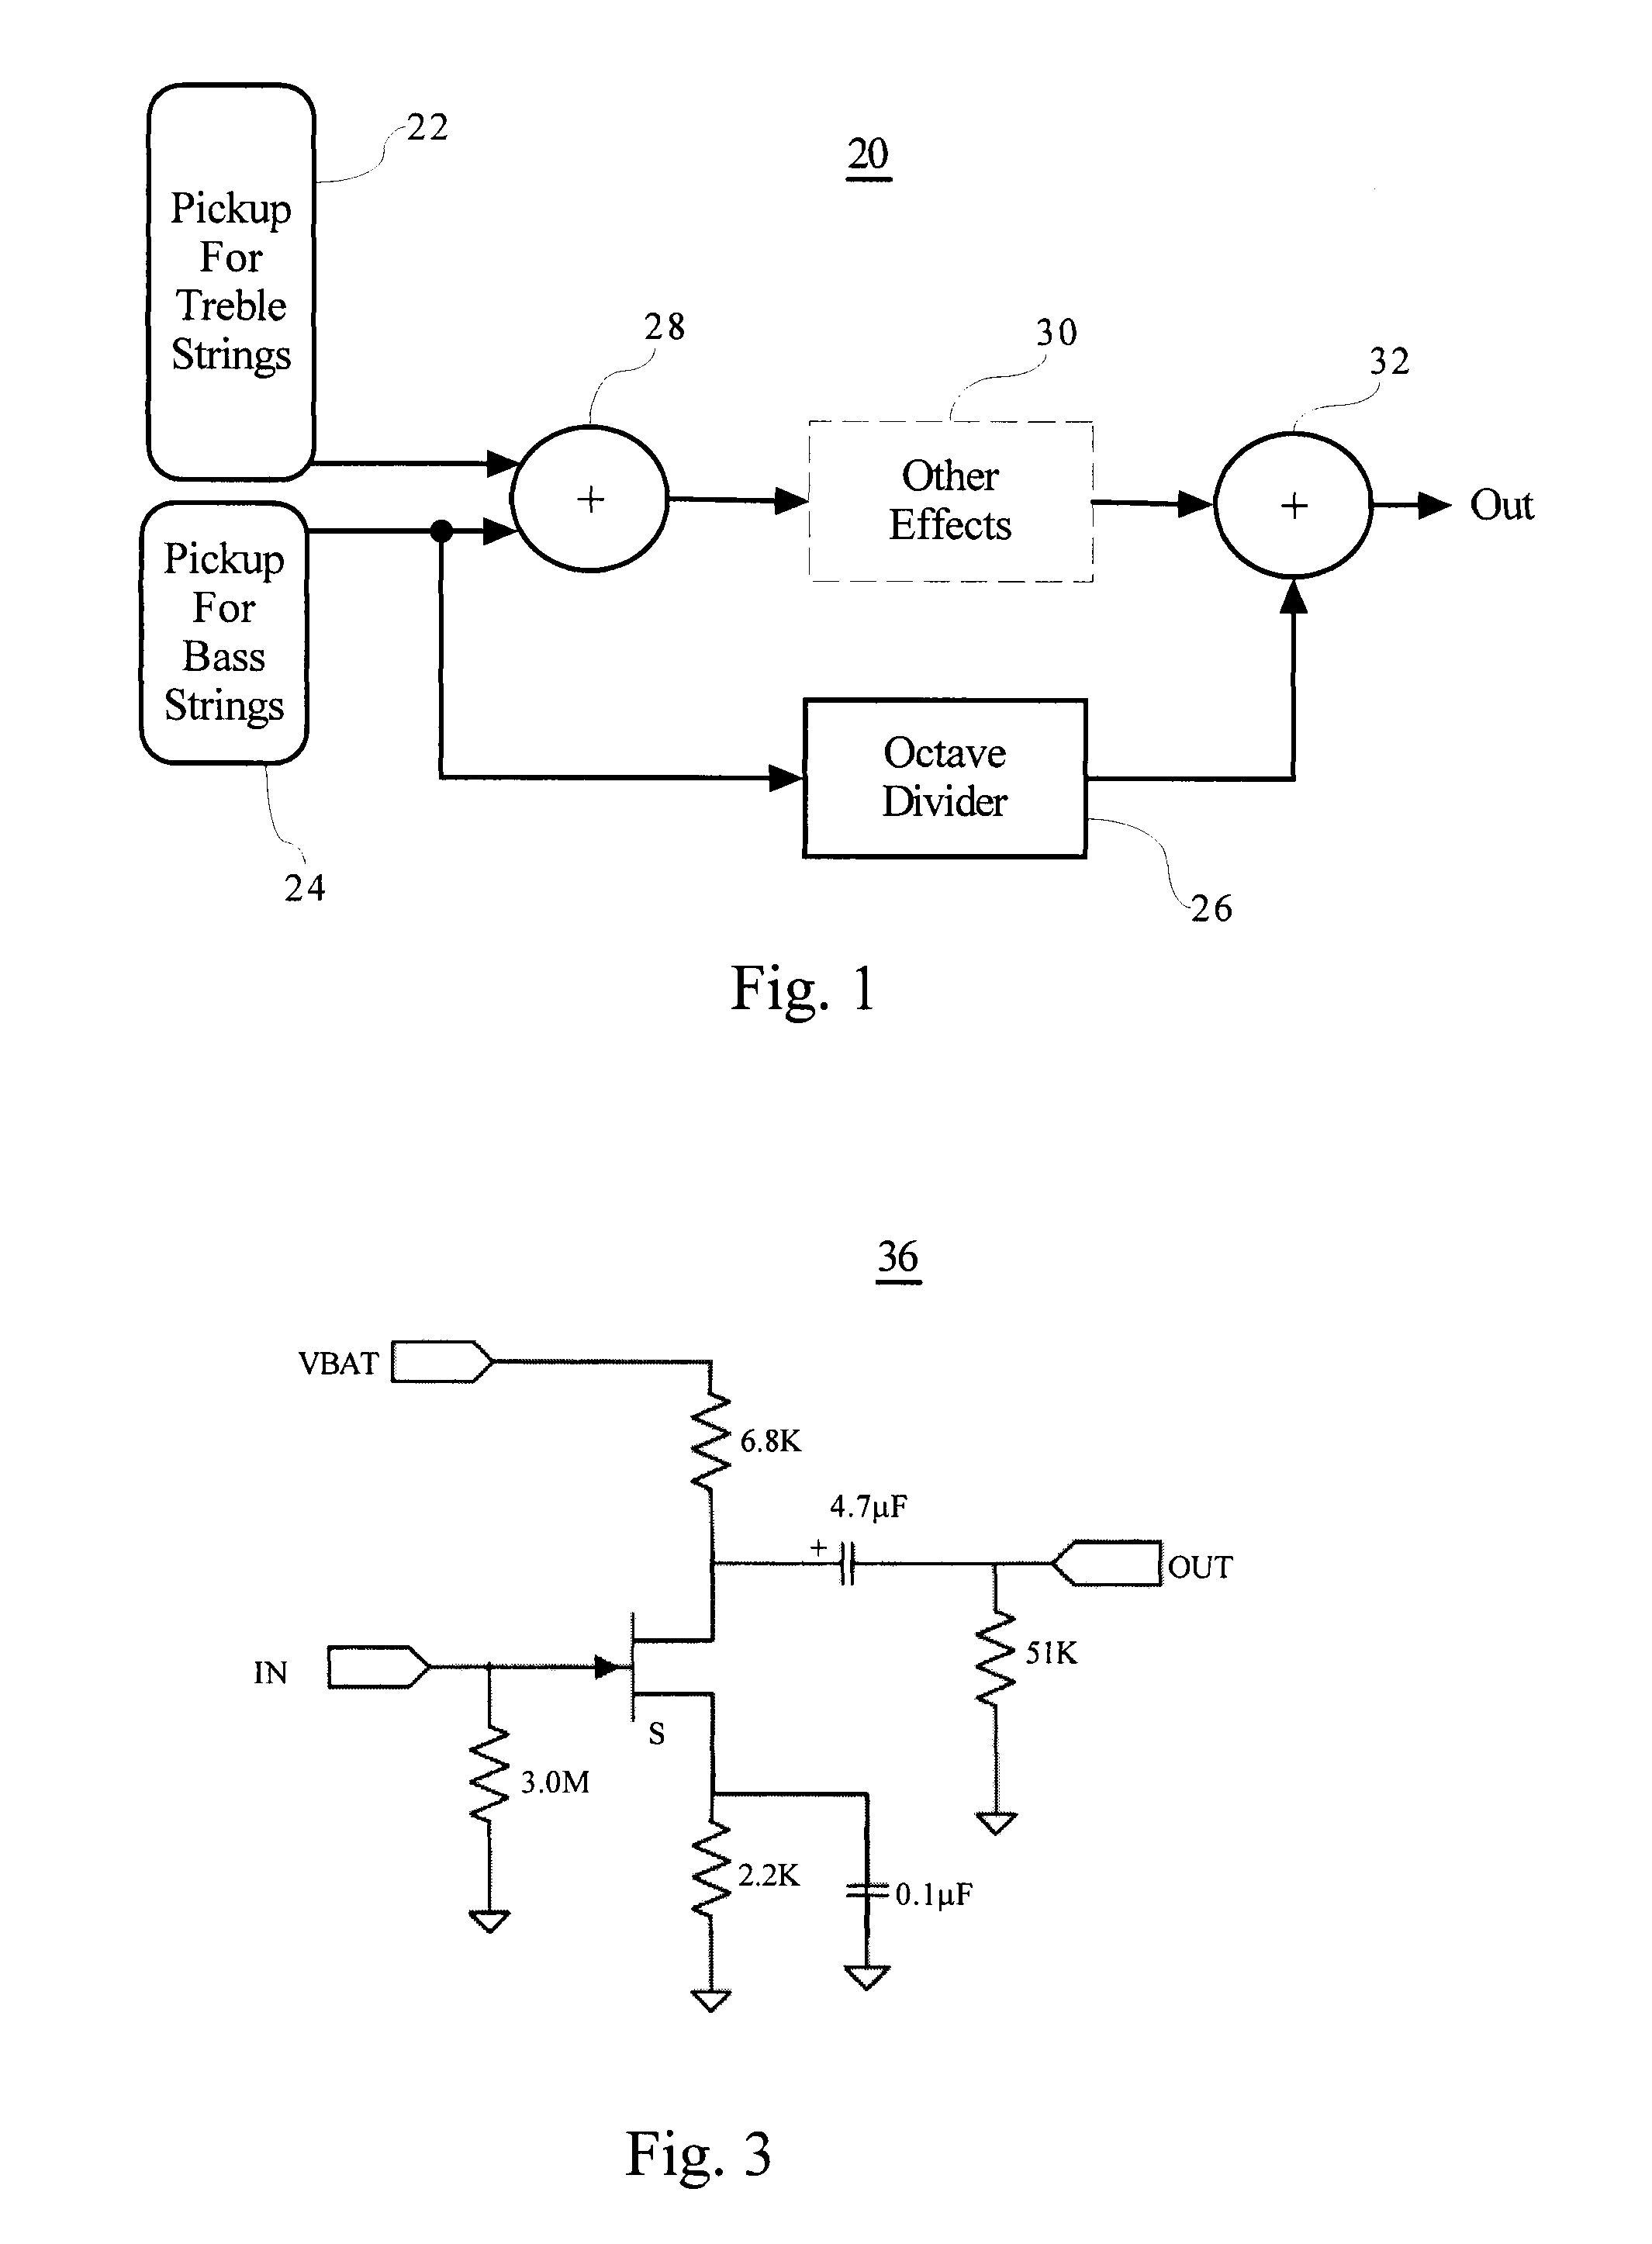 System and method for guitar signal processing